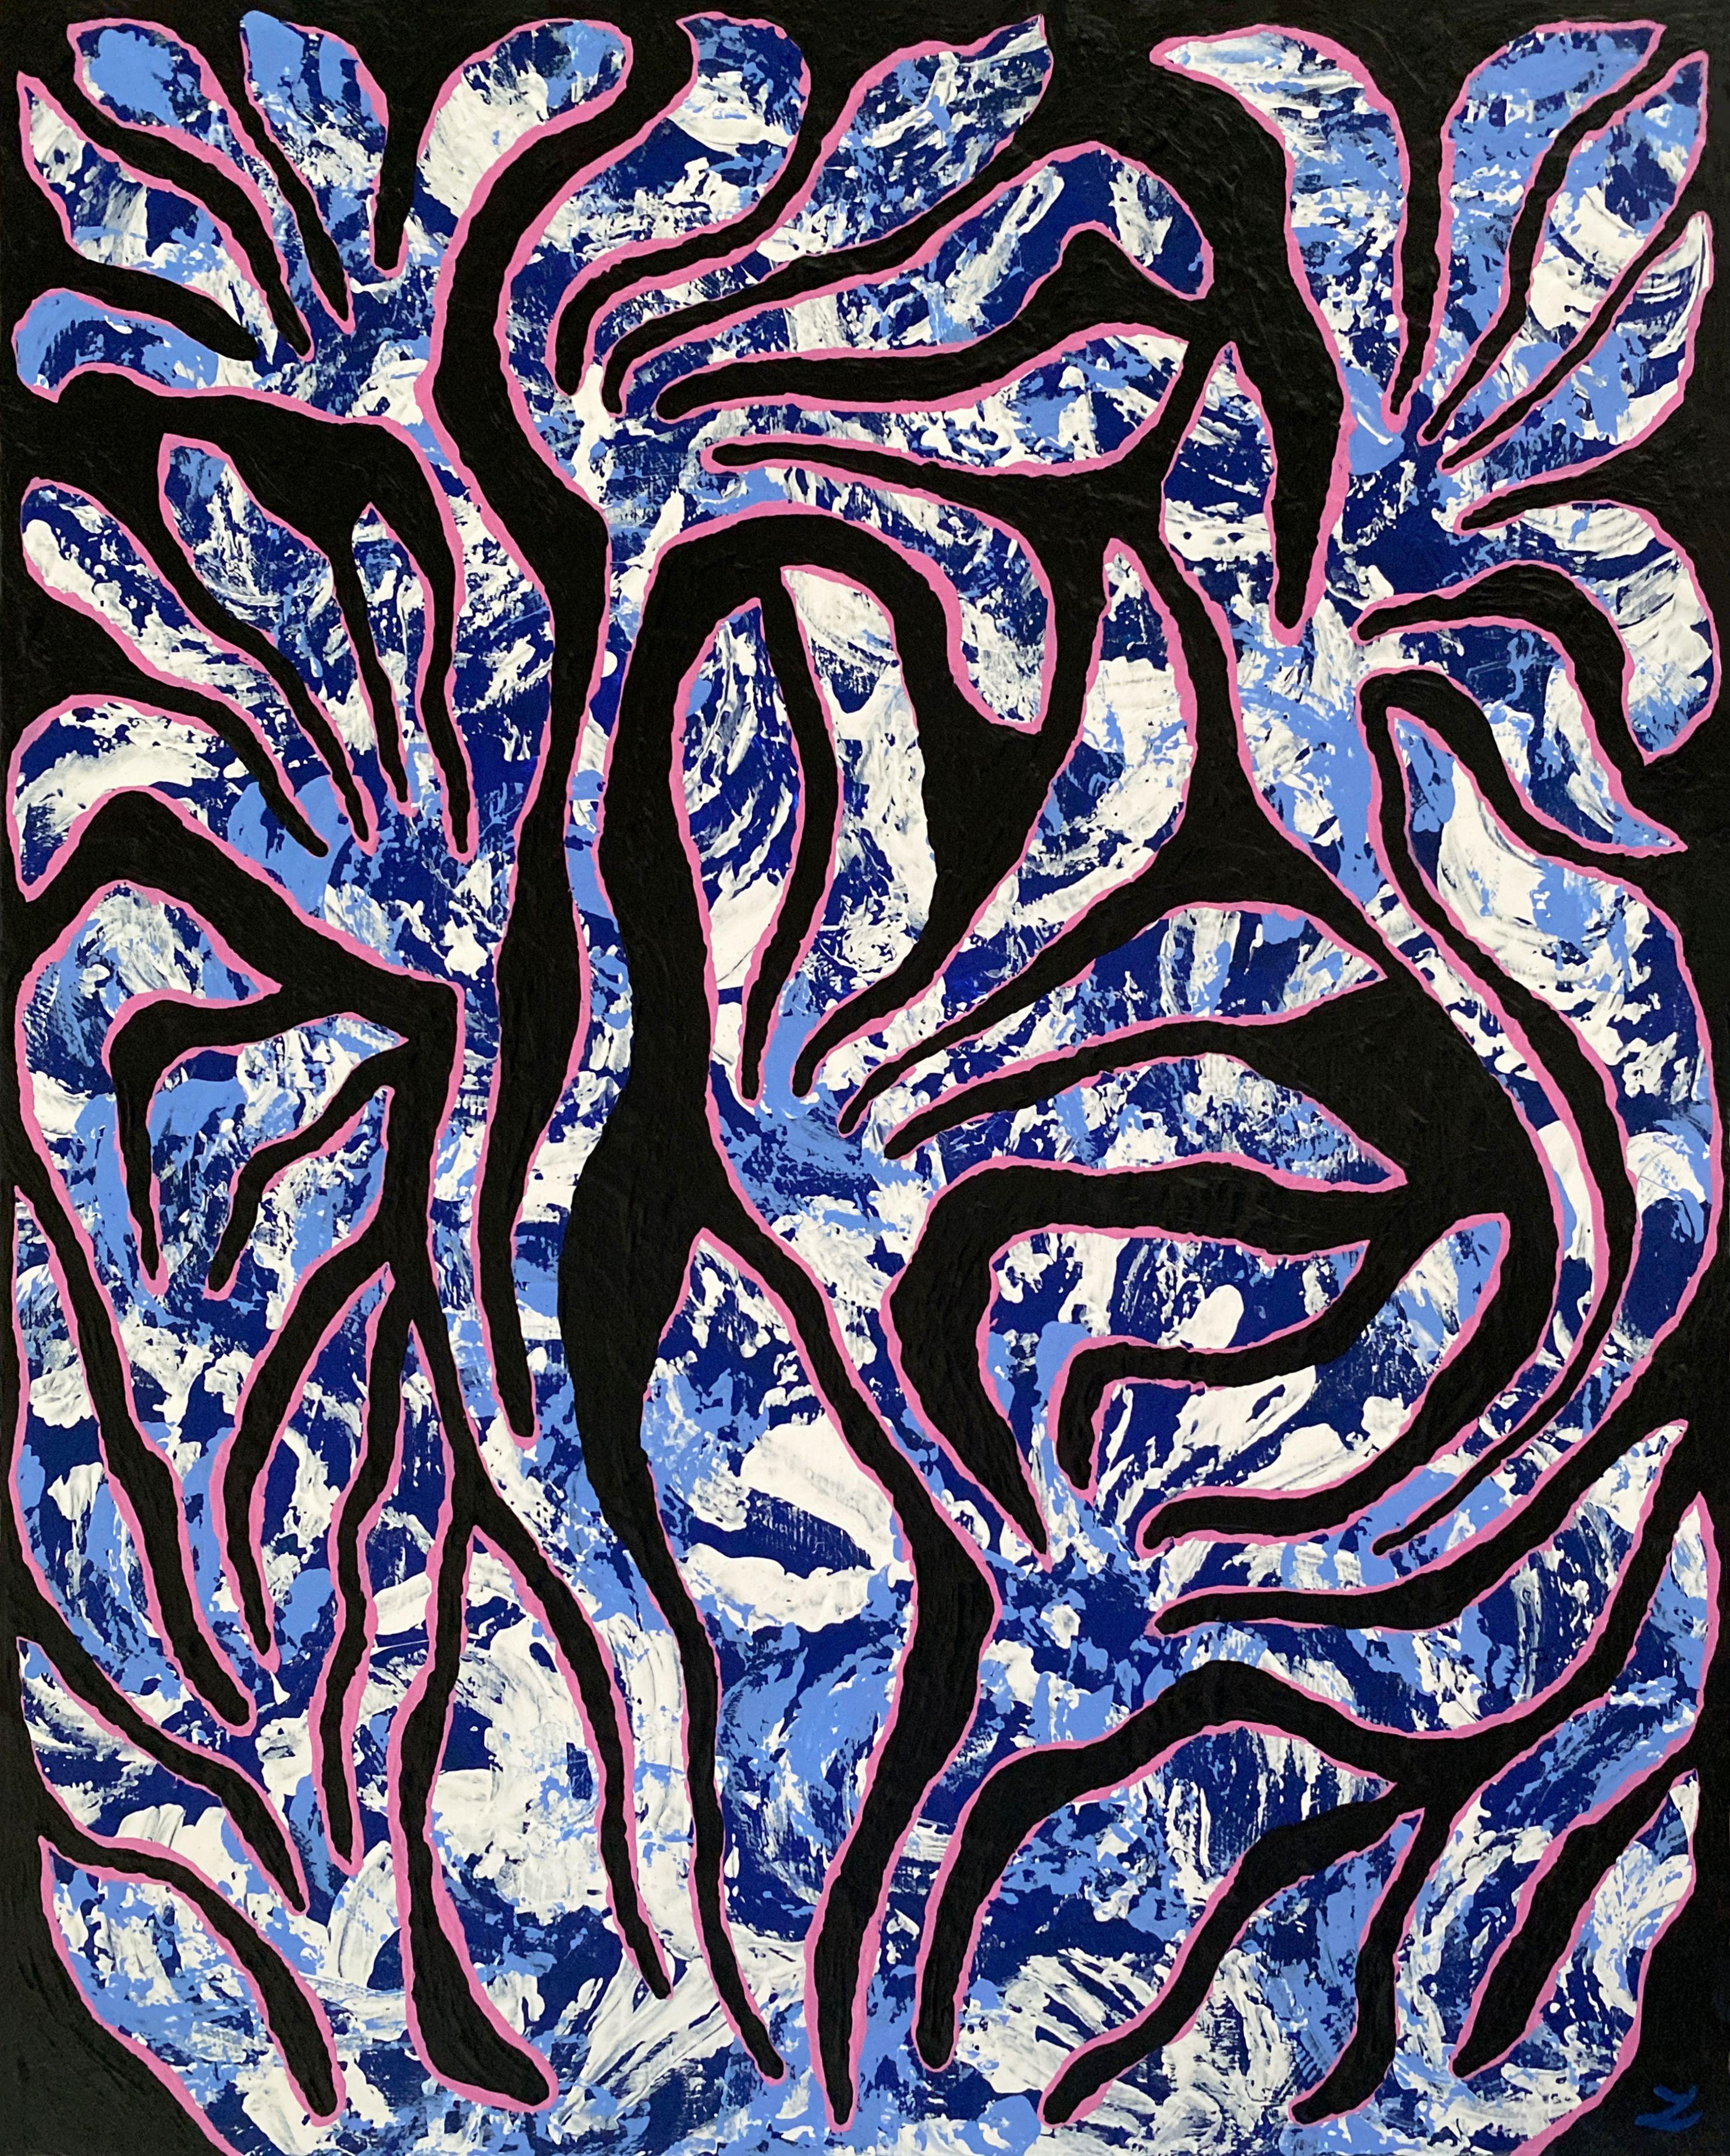 Abstract flowers made in blue, pink, white, and black. Original acrylic painting on stretched canvas. Gallery profile. Very rich texture. Size 16 x 20 x 1.5". Professional natural cotton duck. Certificate of authenticity is included. Frameless